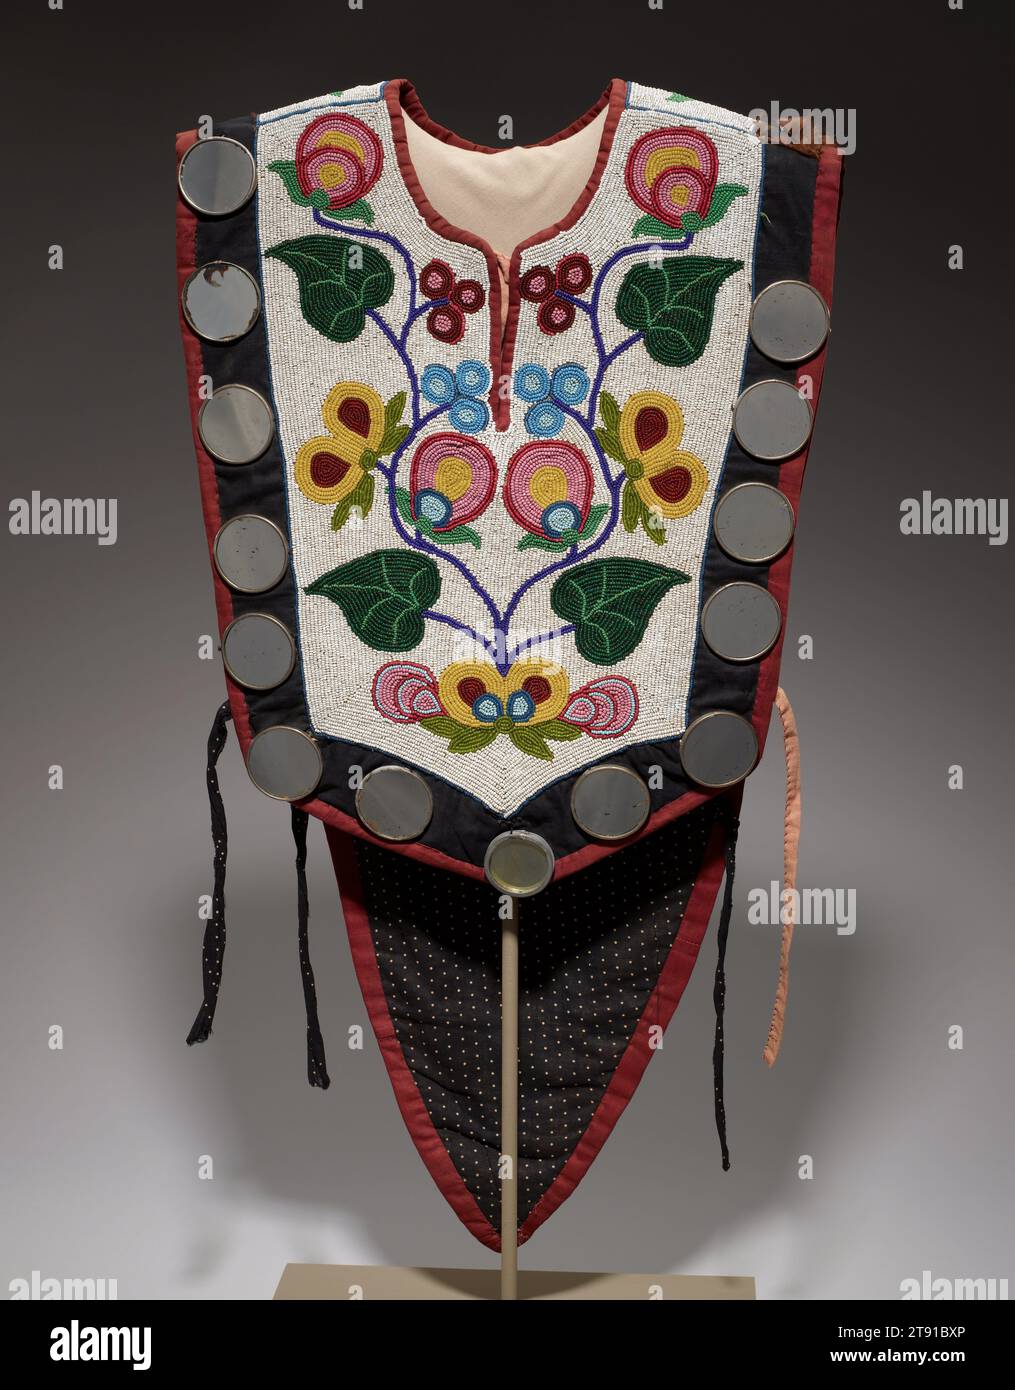 Cape, 19th-20th century, 29 x 15 3/4 in. (73.7 x 40.0 cm), Cotton, glass beads, fur, metal, mirrors, United States, 19th-20th century, This spectacularly decorated man's cape would have have been part of an ensemble of beaded clothing, made by an Anishinabe woman for a male relative to wear on special occasions such as social and religious events. Anishinabe women were known for their skill at beadwork and textile ornamentation. The floral designs here are typical of their work, while the mirrors add an extra element of shine and color. The rich and extensive decoration added to the value Stock Photo